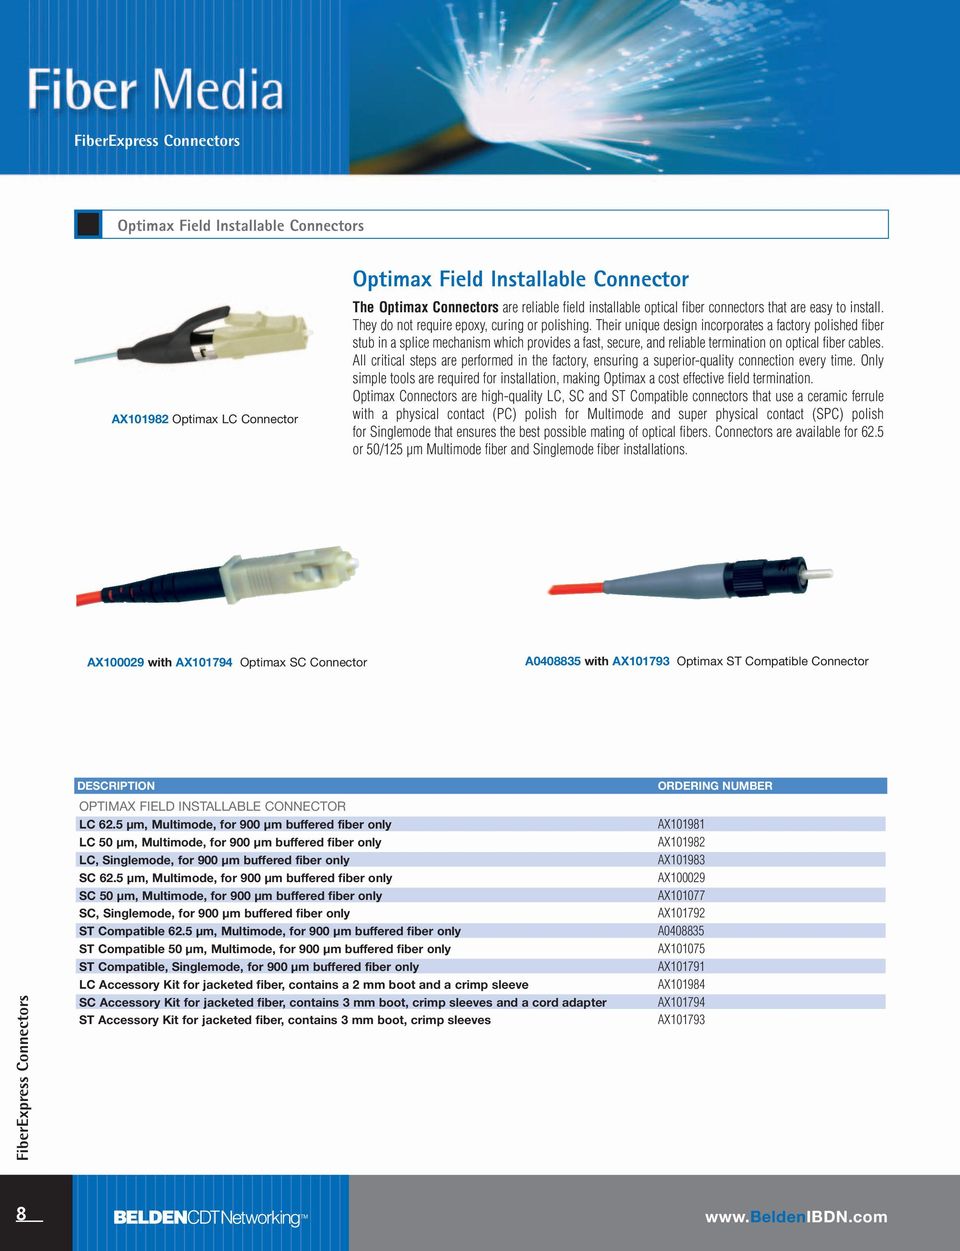 Their unique design incorporates a factory polished fiber stub in a splice mechanism which provides a fast, secure, and reliable termination on optical fiber cables.